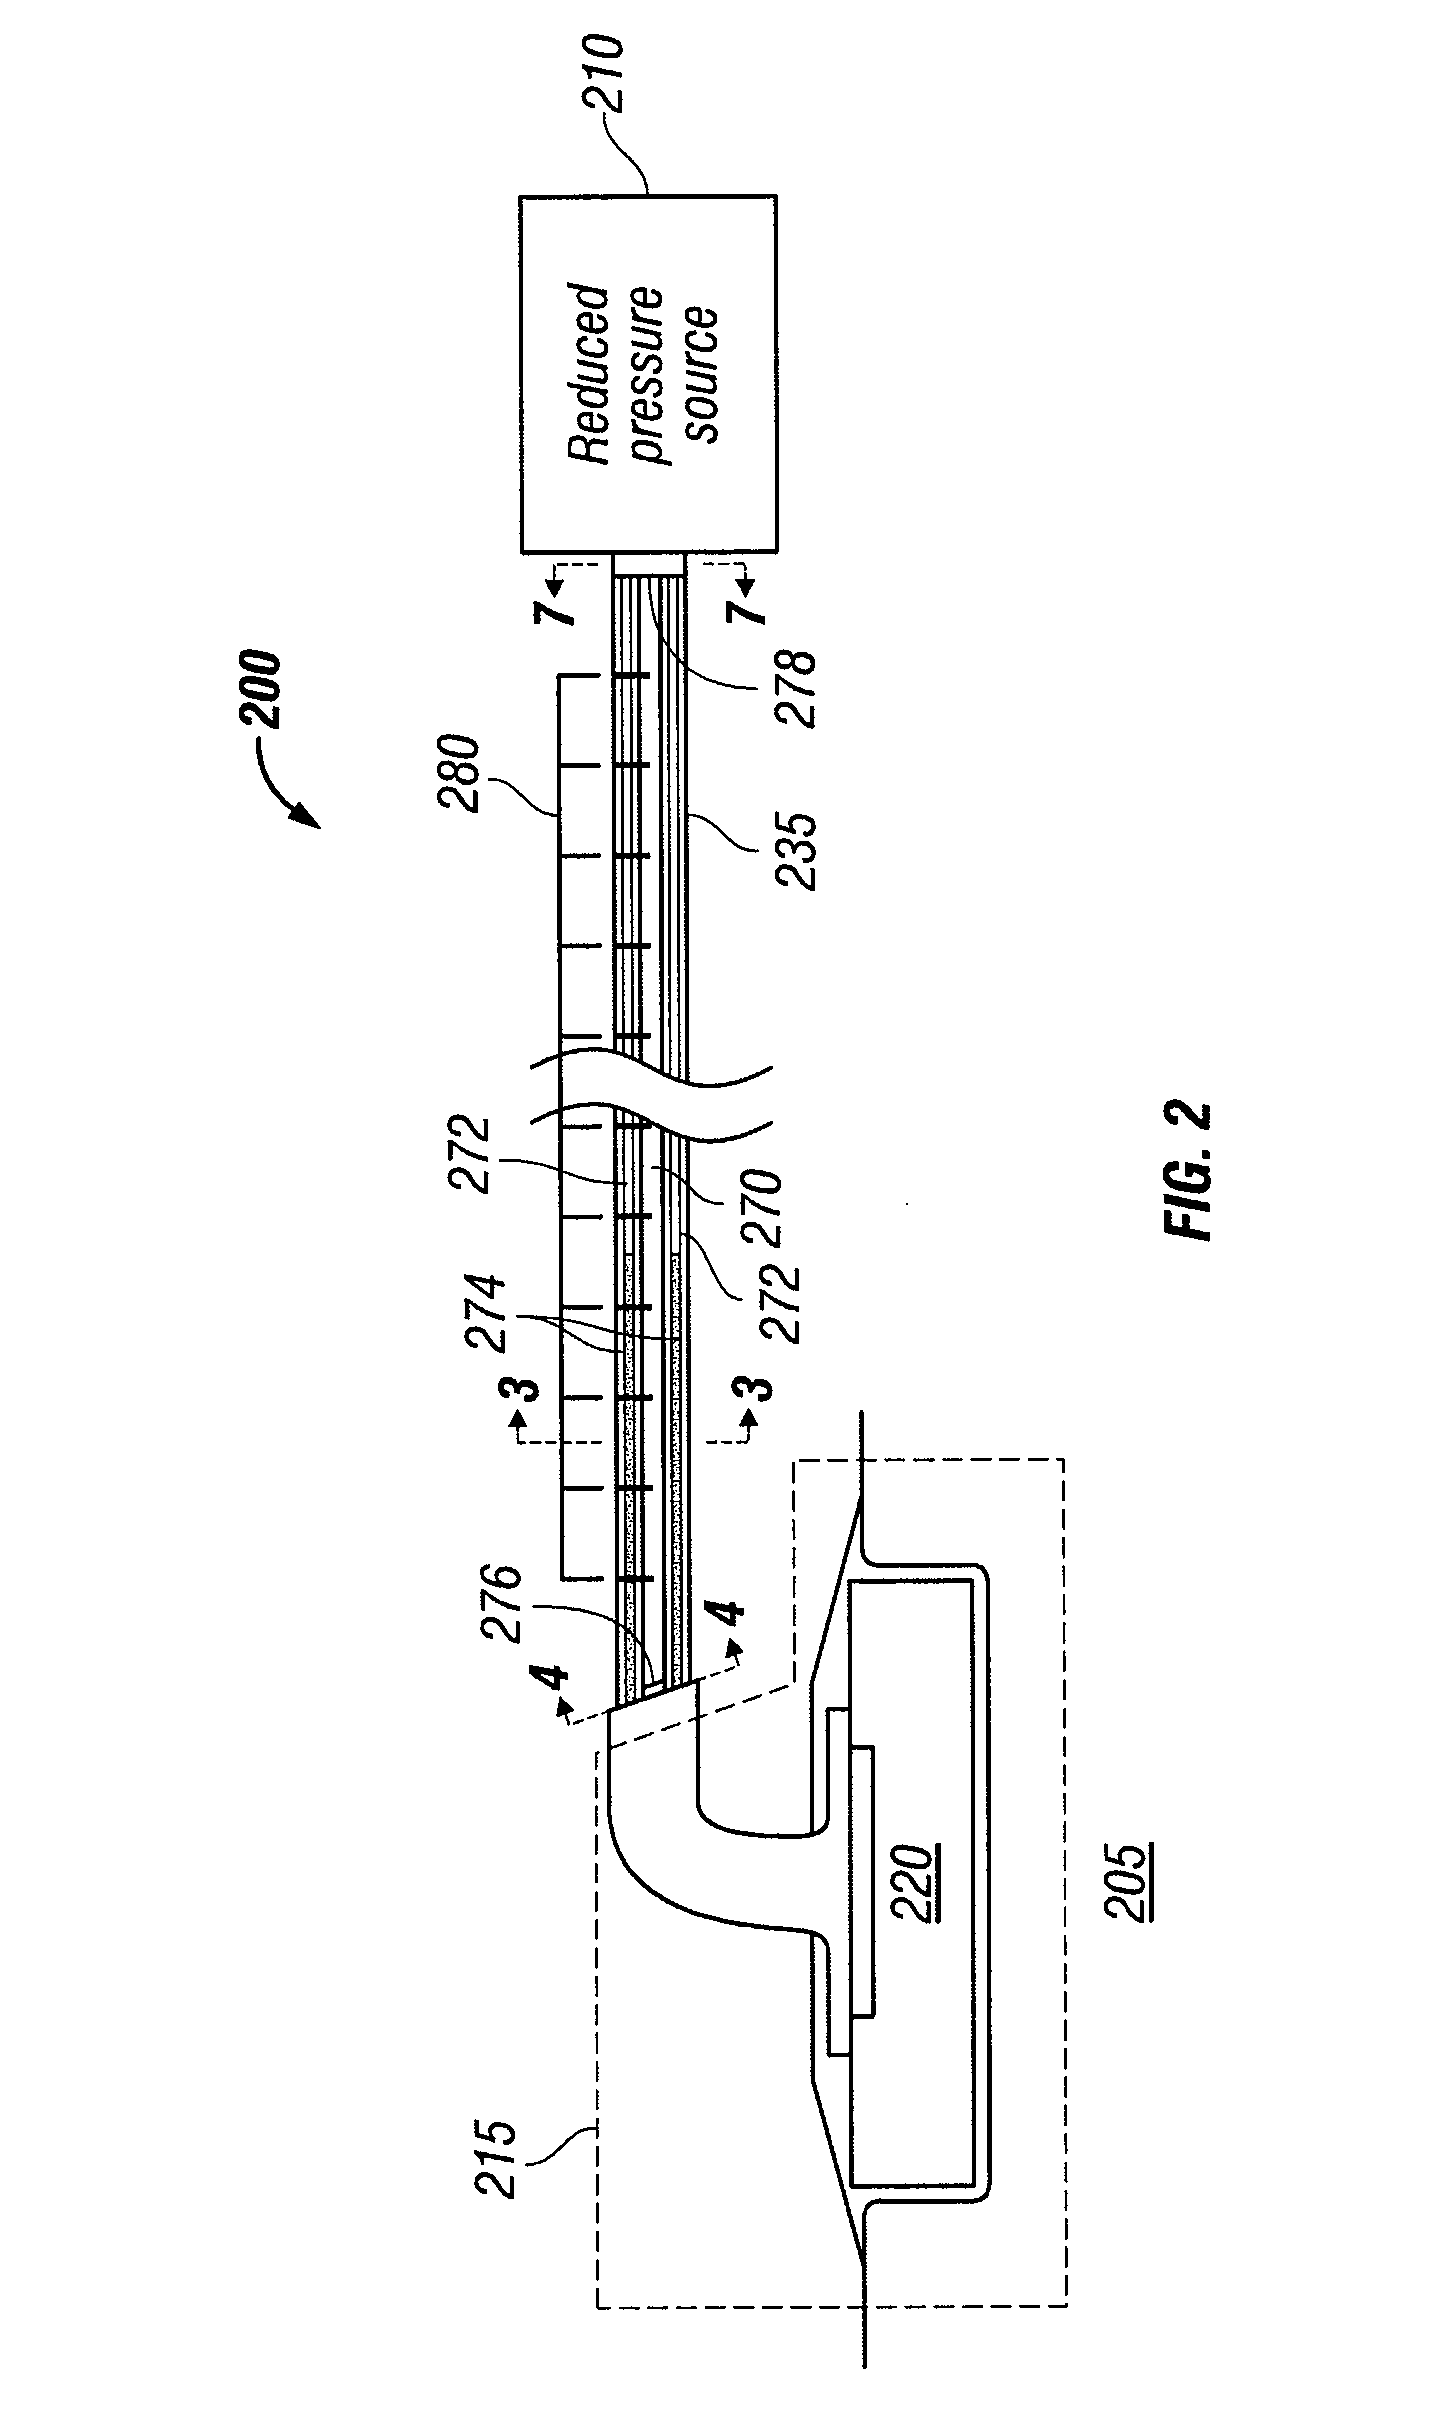 Apparatus and method for administering reduced pressure treatment to a tissue site